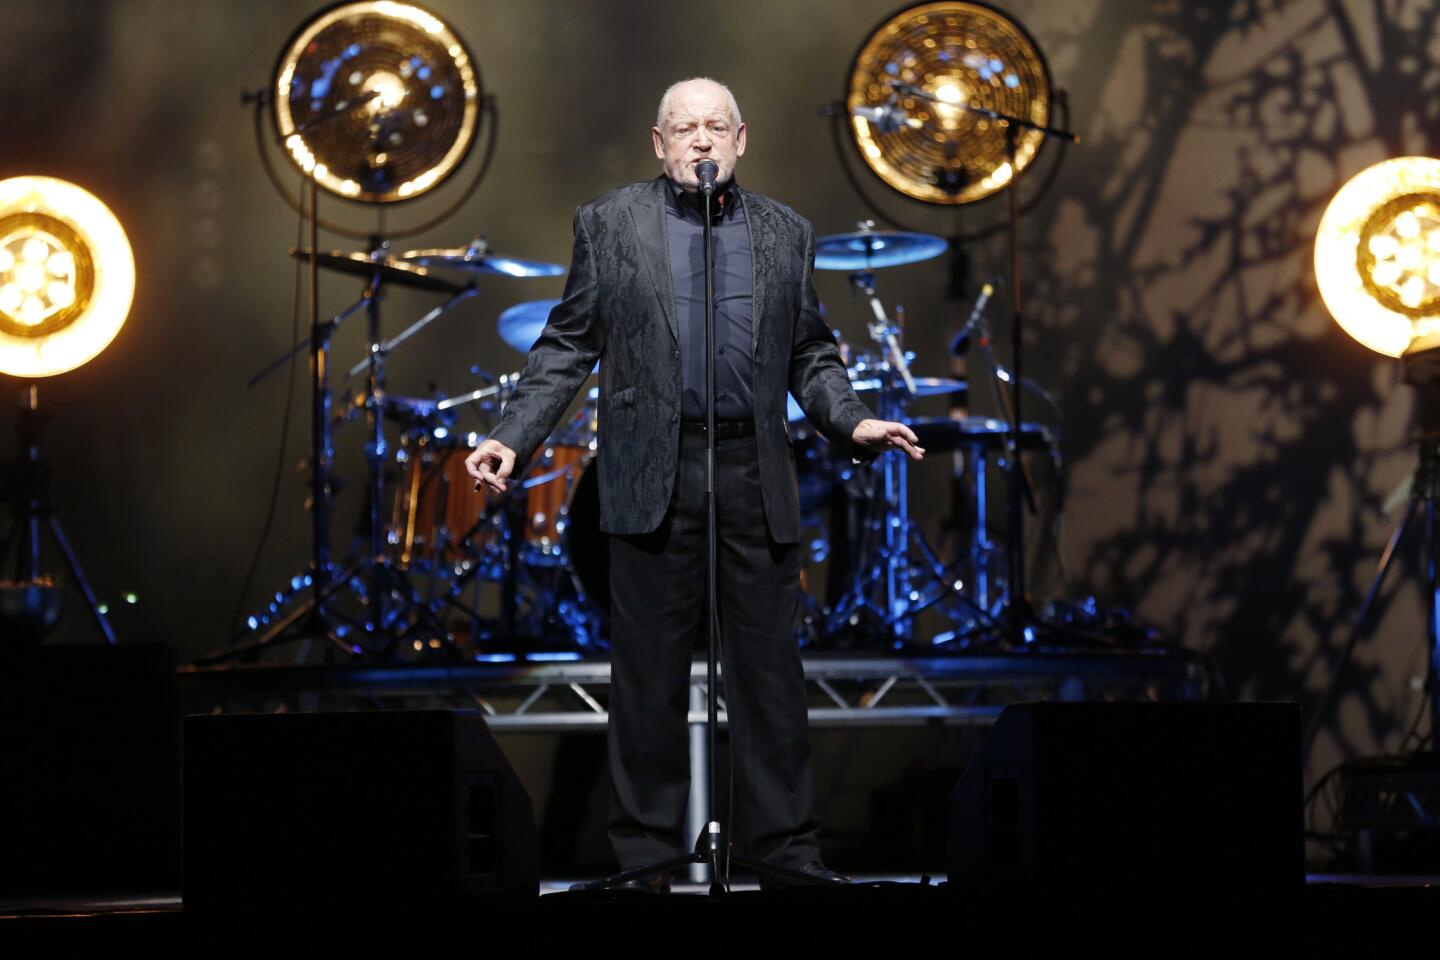 British singer Joe Cocker performs on stage during the "Fire it up tour" concert on April 6, 2013 in Nice, southeastern France.